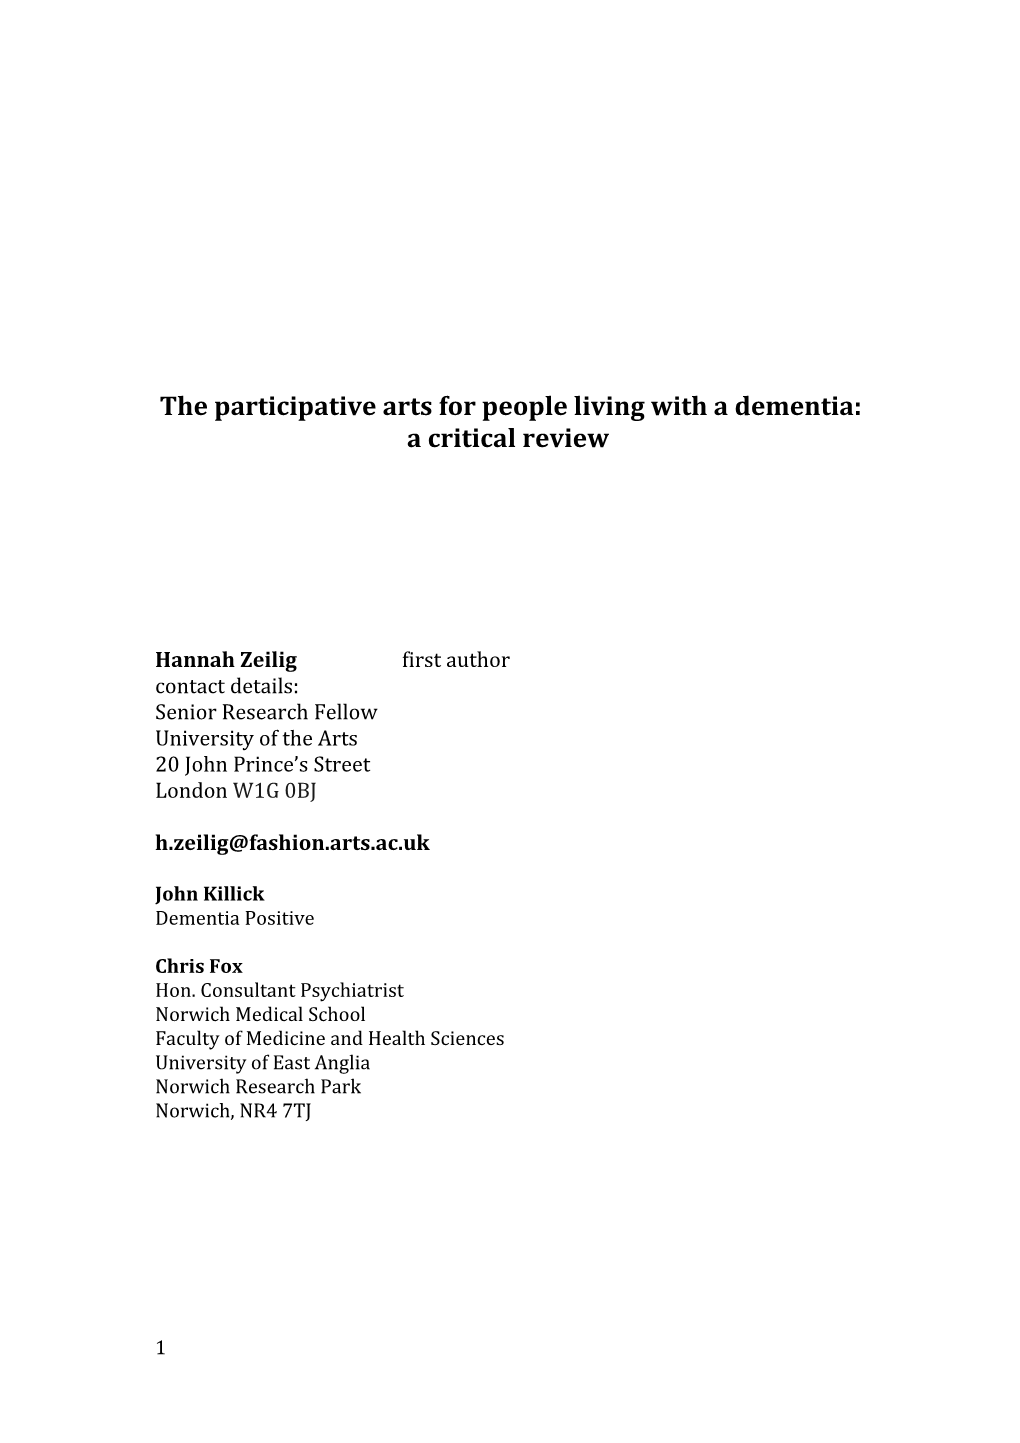 The Participative Arts for People Living with a Dementia: a Critical Review